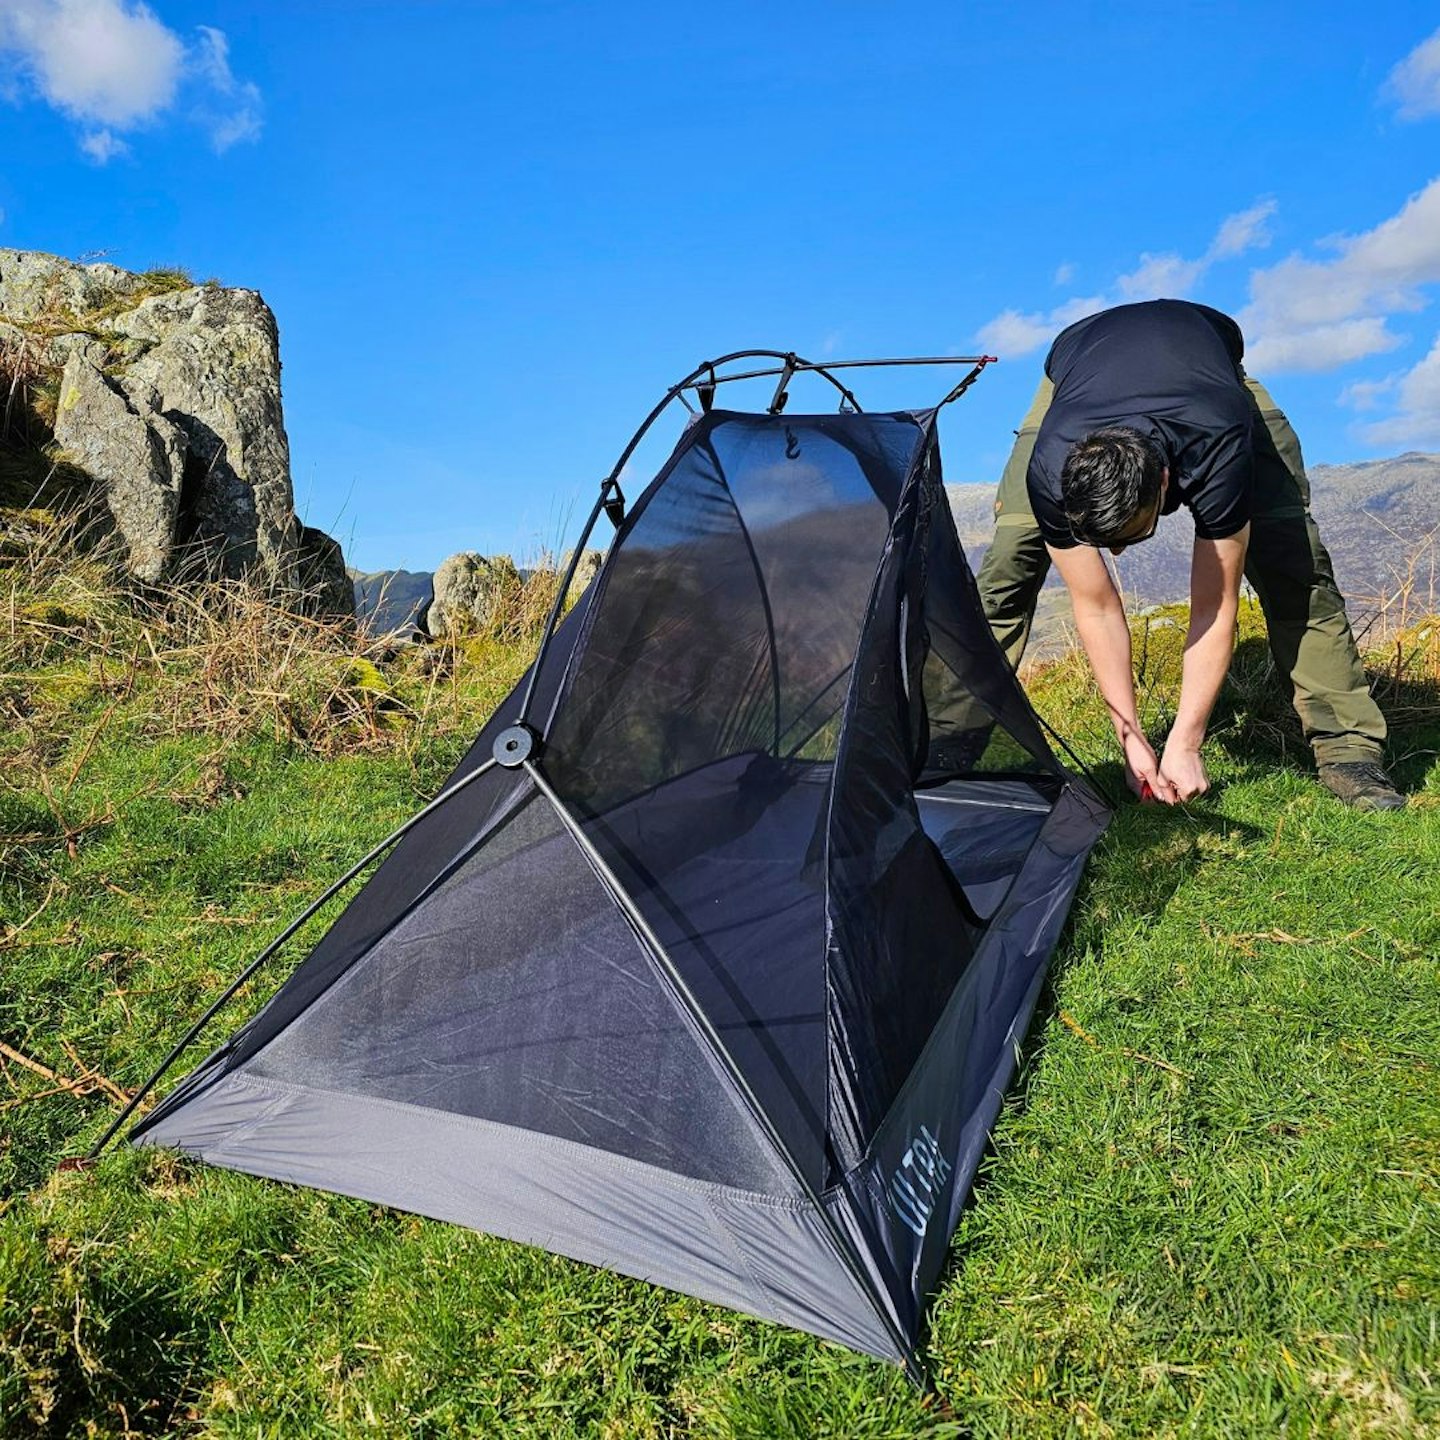 Alpkit Ultra 1 Tent inner pitching